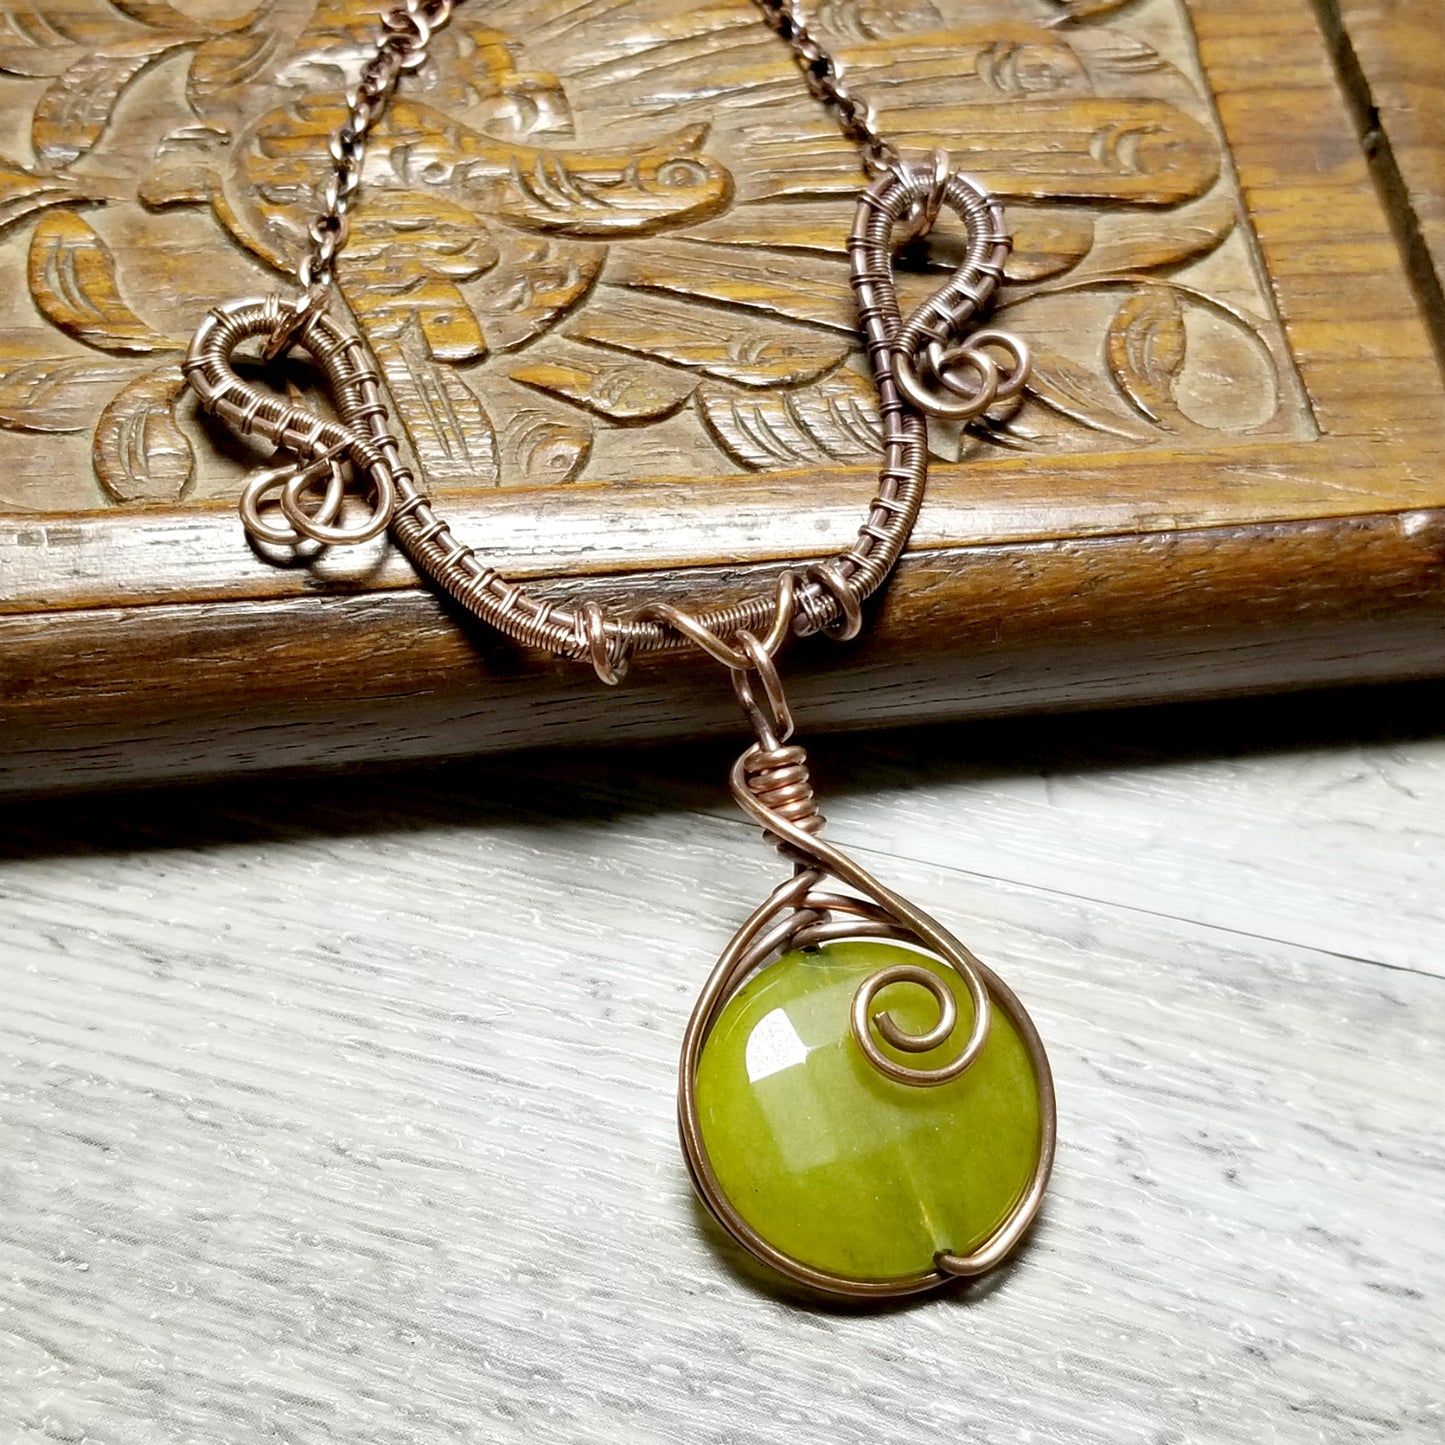 Jewelry for Women, Wire Wrapped Gemstone Pendant